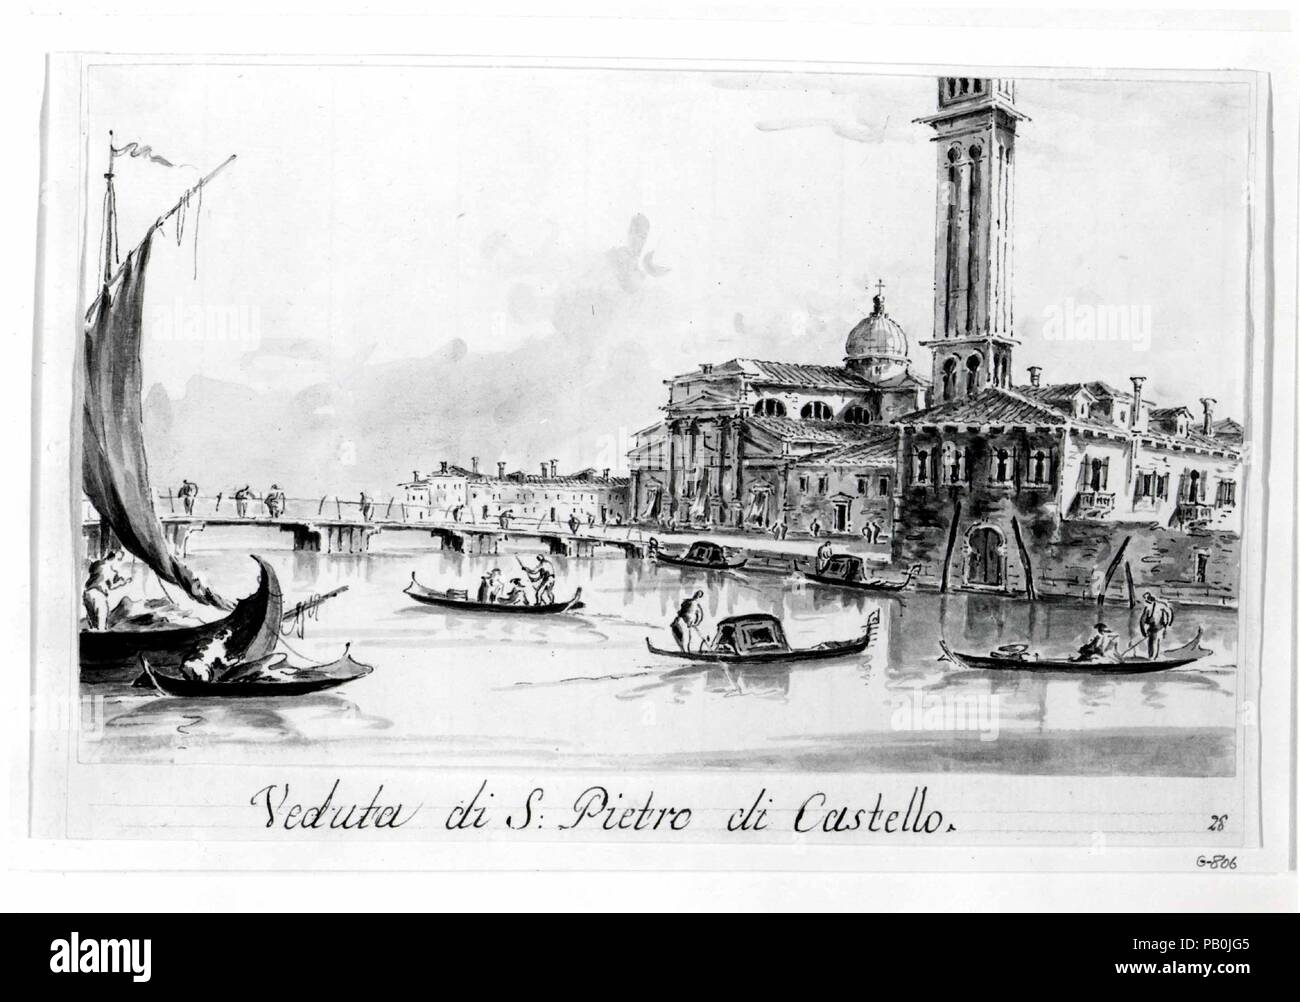 San Pietro di Castello. Artist: Giacomo Guardi (Italian, Venice (?) 1764-1835 Venice (?)). Dimensions: 4 7/8 x 8 5/16 in.  (12.4 x 21.1 cm). Date: ca. 1804-28.  This is one of a series of drawings, all in pen and ink, and gray wash, that formed part of an album housing forty-eight views of Venice and the surrounding islands.  Recognizing the market incentive to produce rather prosaic drawings as keepsakes for visiting tourists, Giacomo made numerous such albums, repeating the compositions as necessary. The view of the Piazza San Marco, which begins the numbered series, is probably derived from Stock Photo